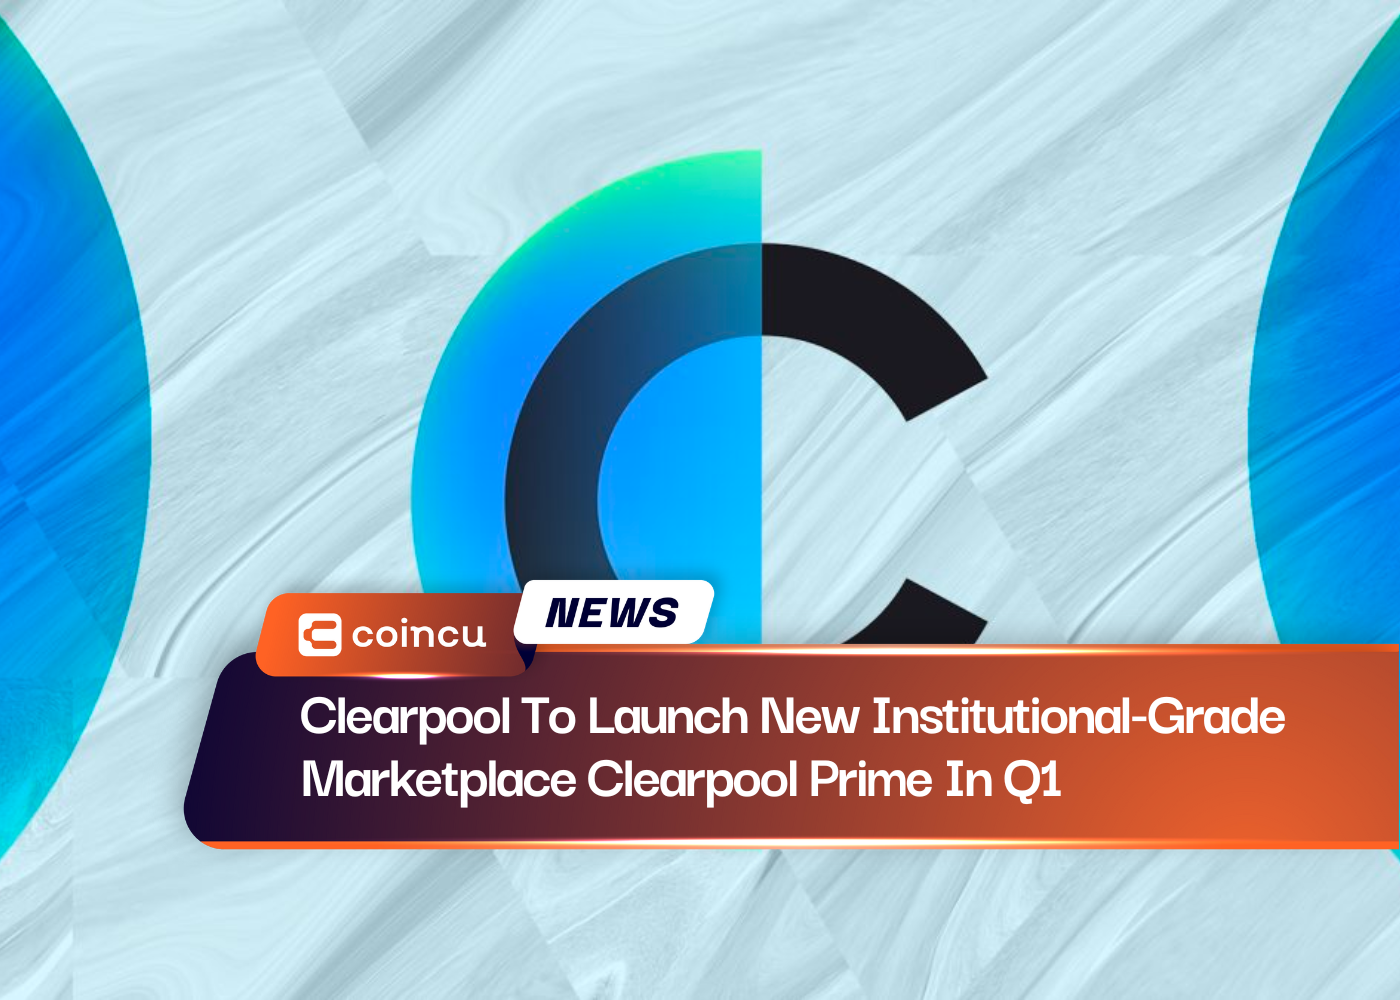 Clearpool To Launch New Institutional-Grade Marketplace Clearpool Prime In Q1